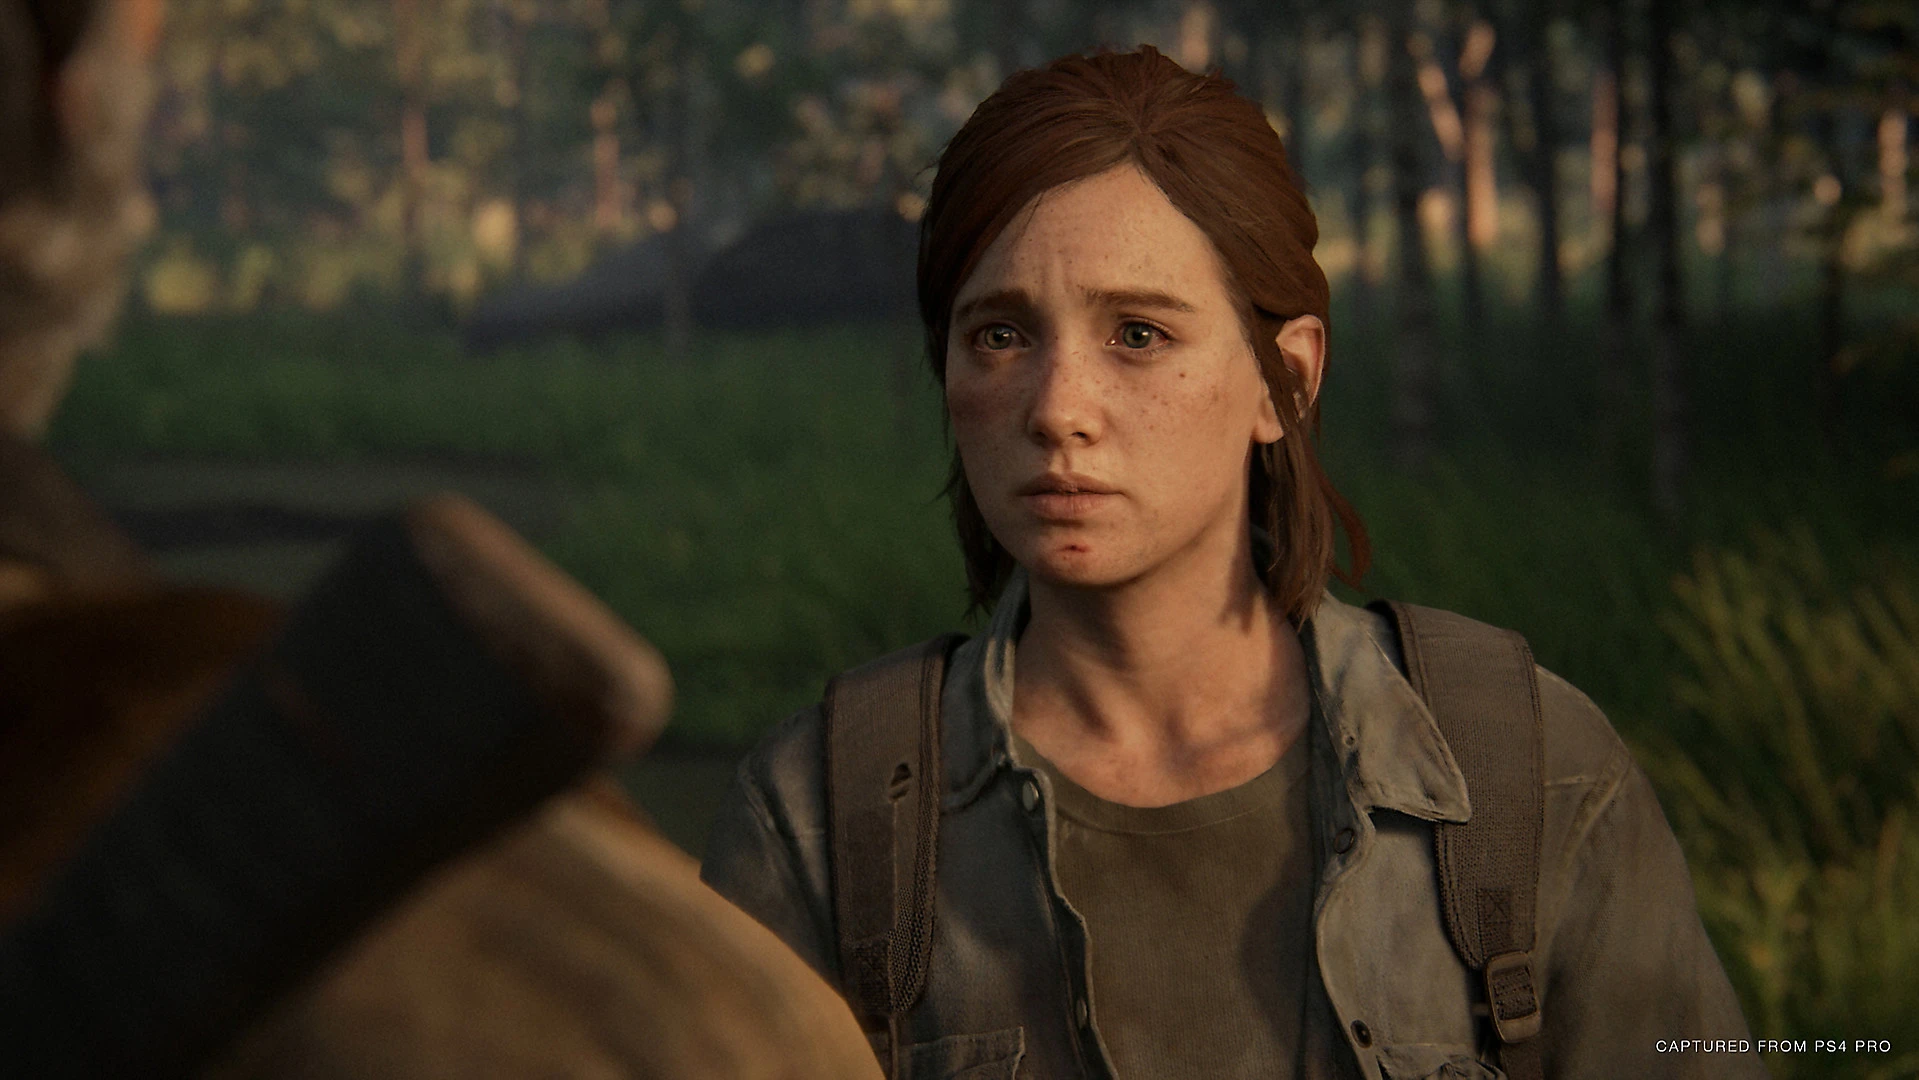 An emotional Ellie in Naughty Dog's The Last of Us Part 2